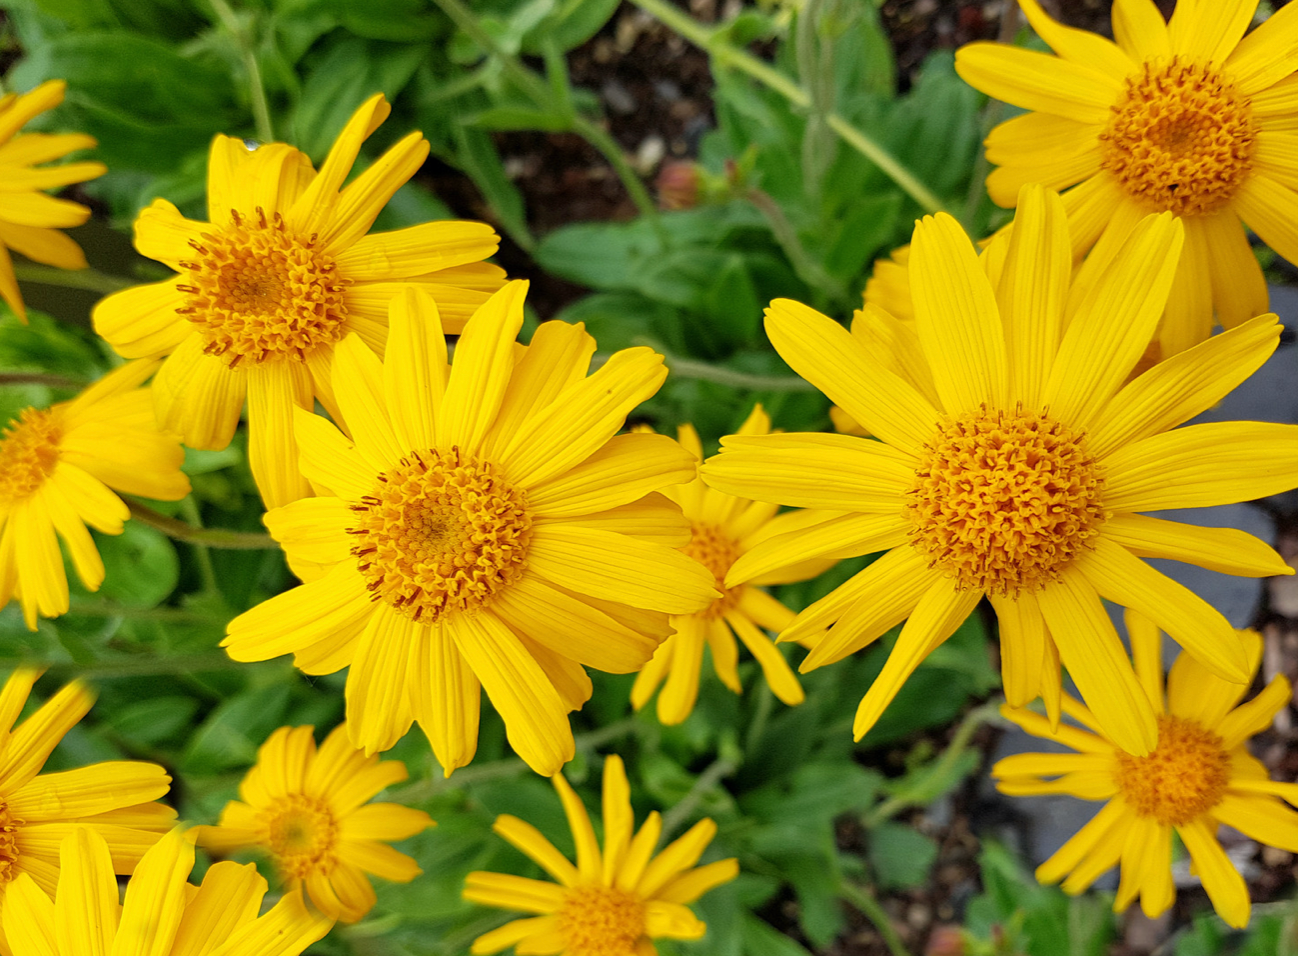 BENEFITS OF USING ARNICA AFTER SURGERY